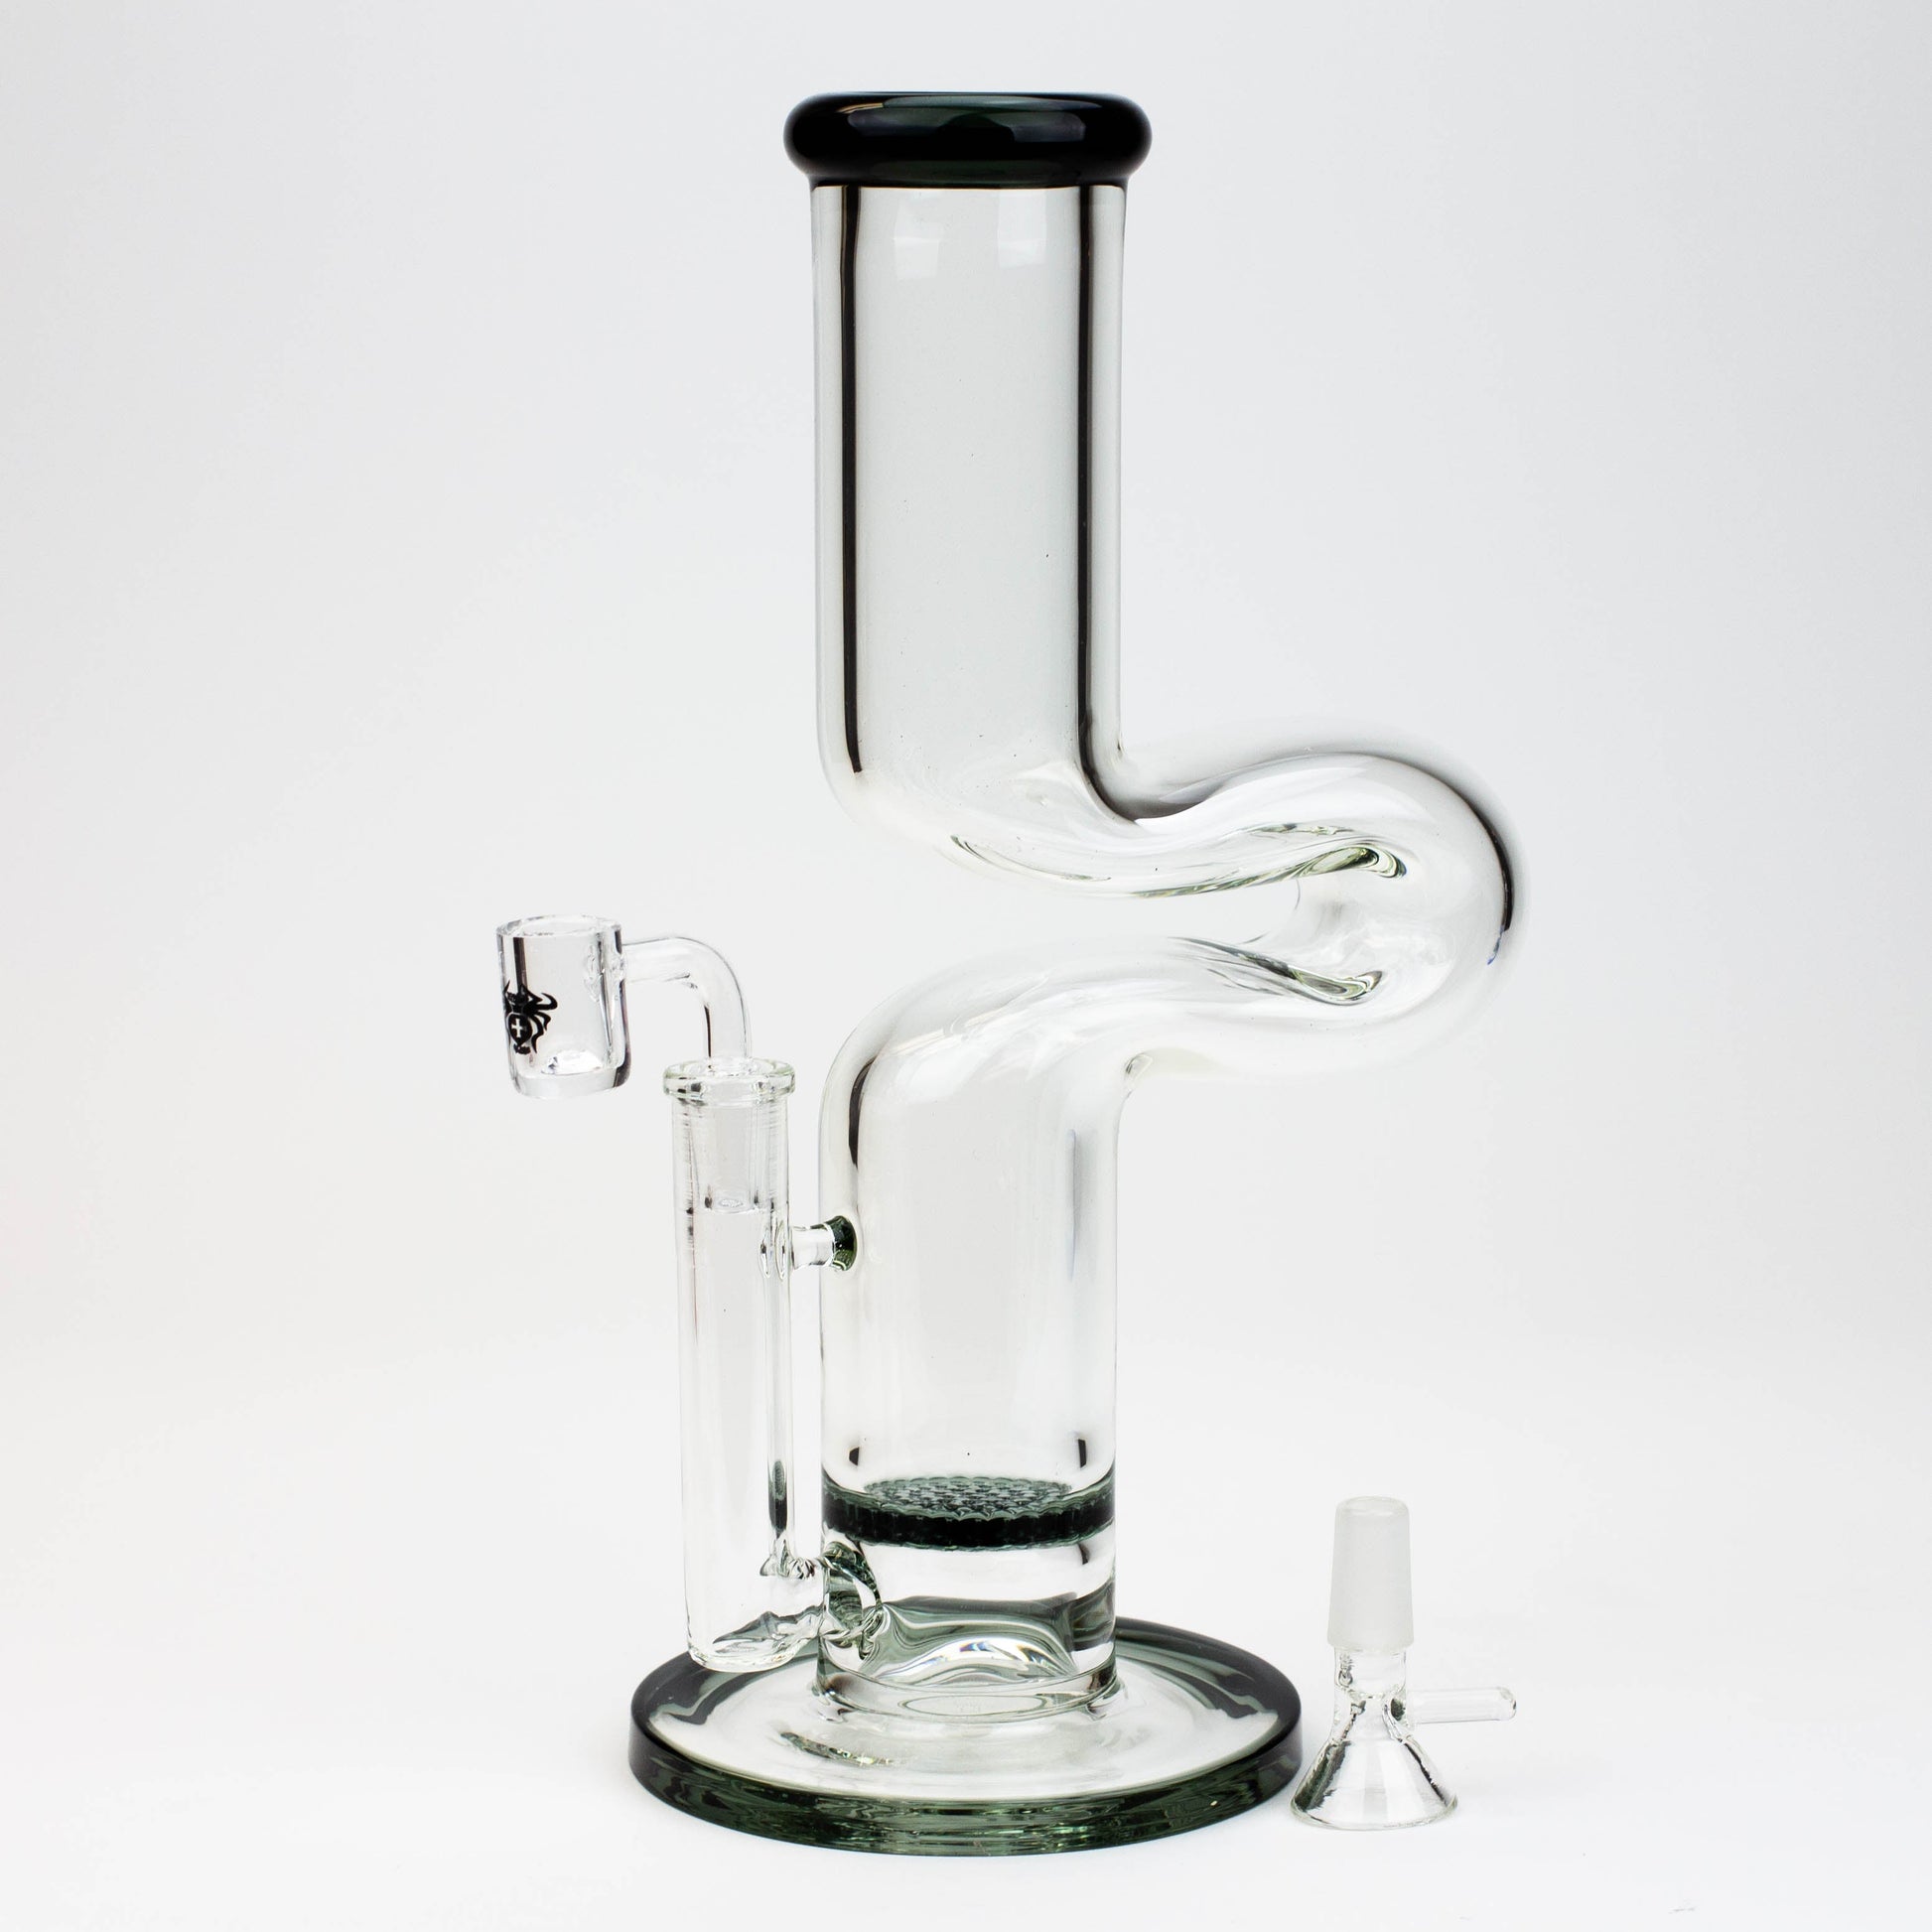 11.5" 2-in-1 7mm Kink glass water bong_5